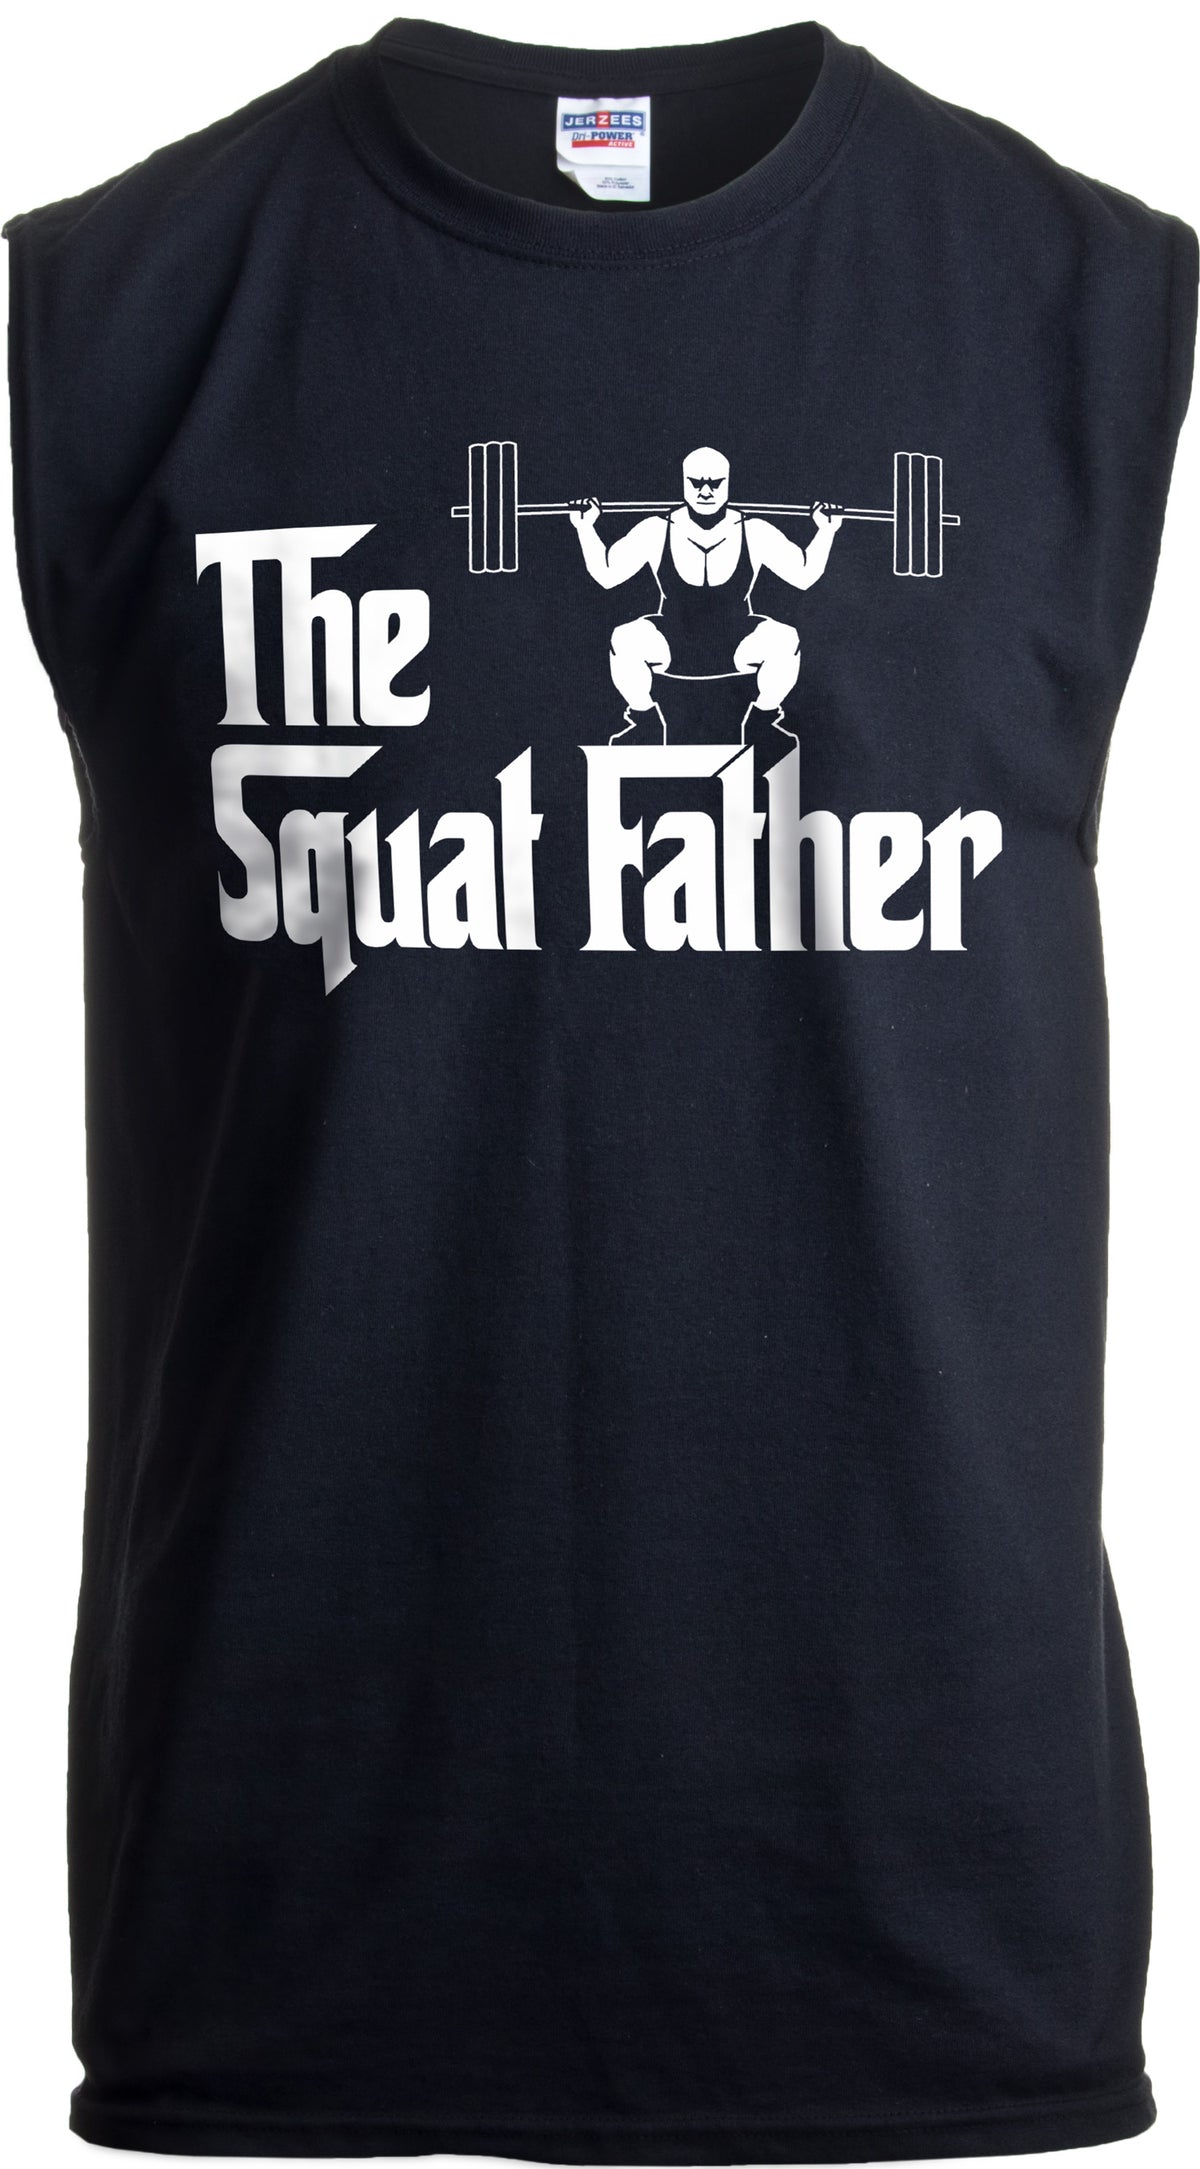 The Squat Father | Funny Workout Weight Lifting Sleeveless Muscle Shirt for Men